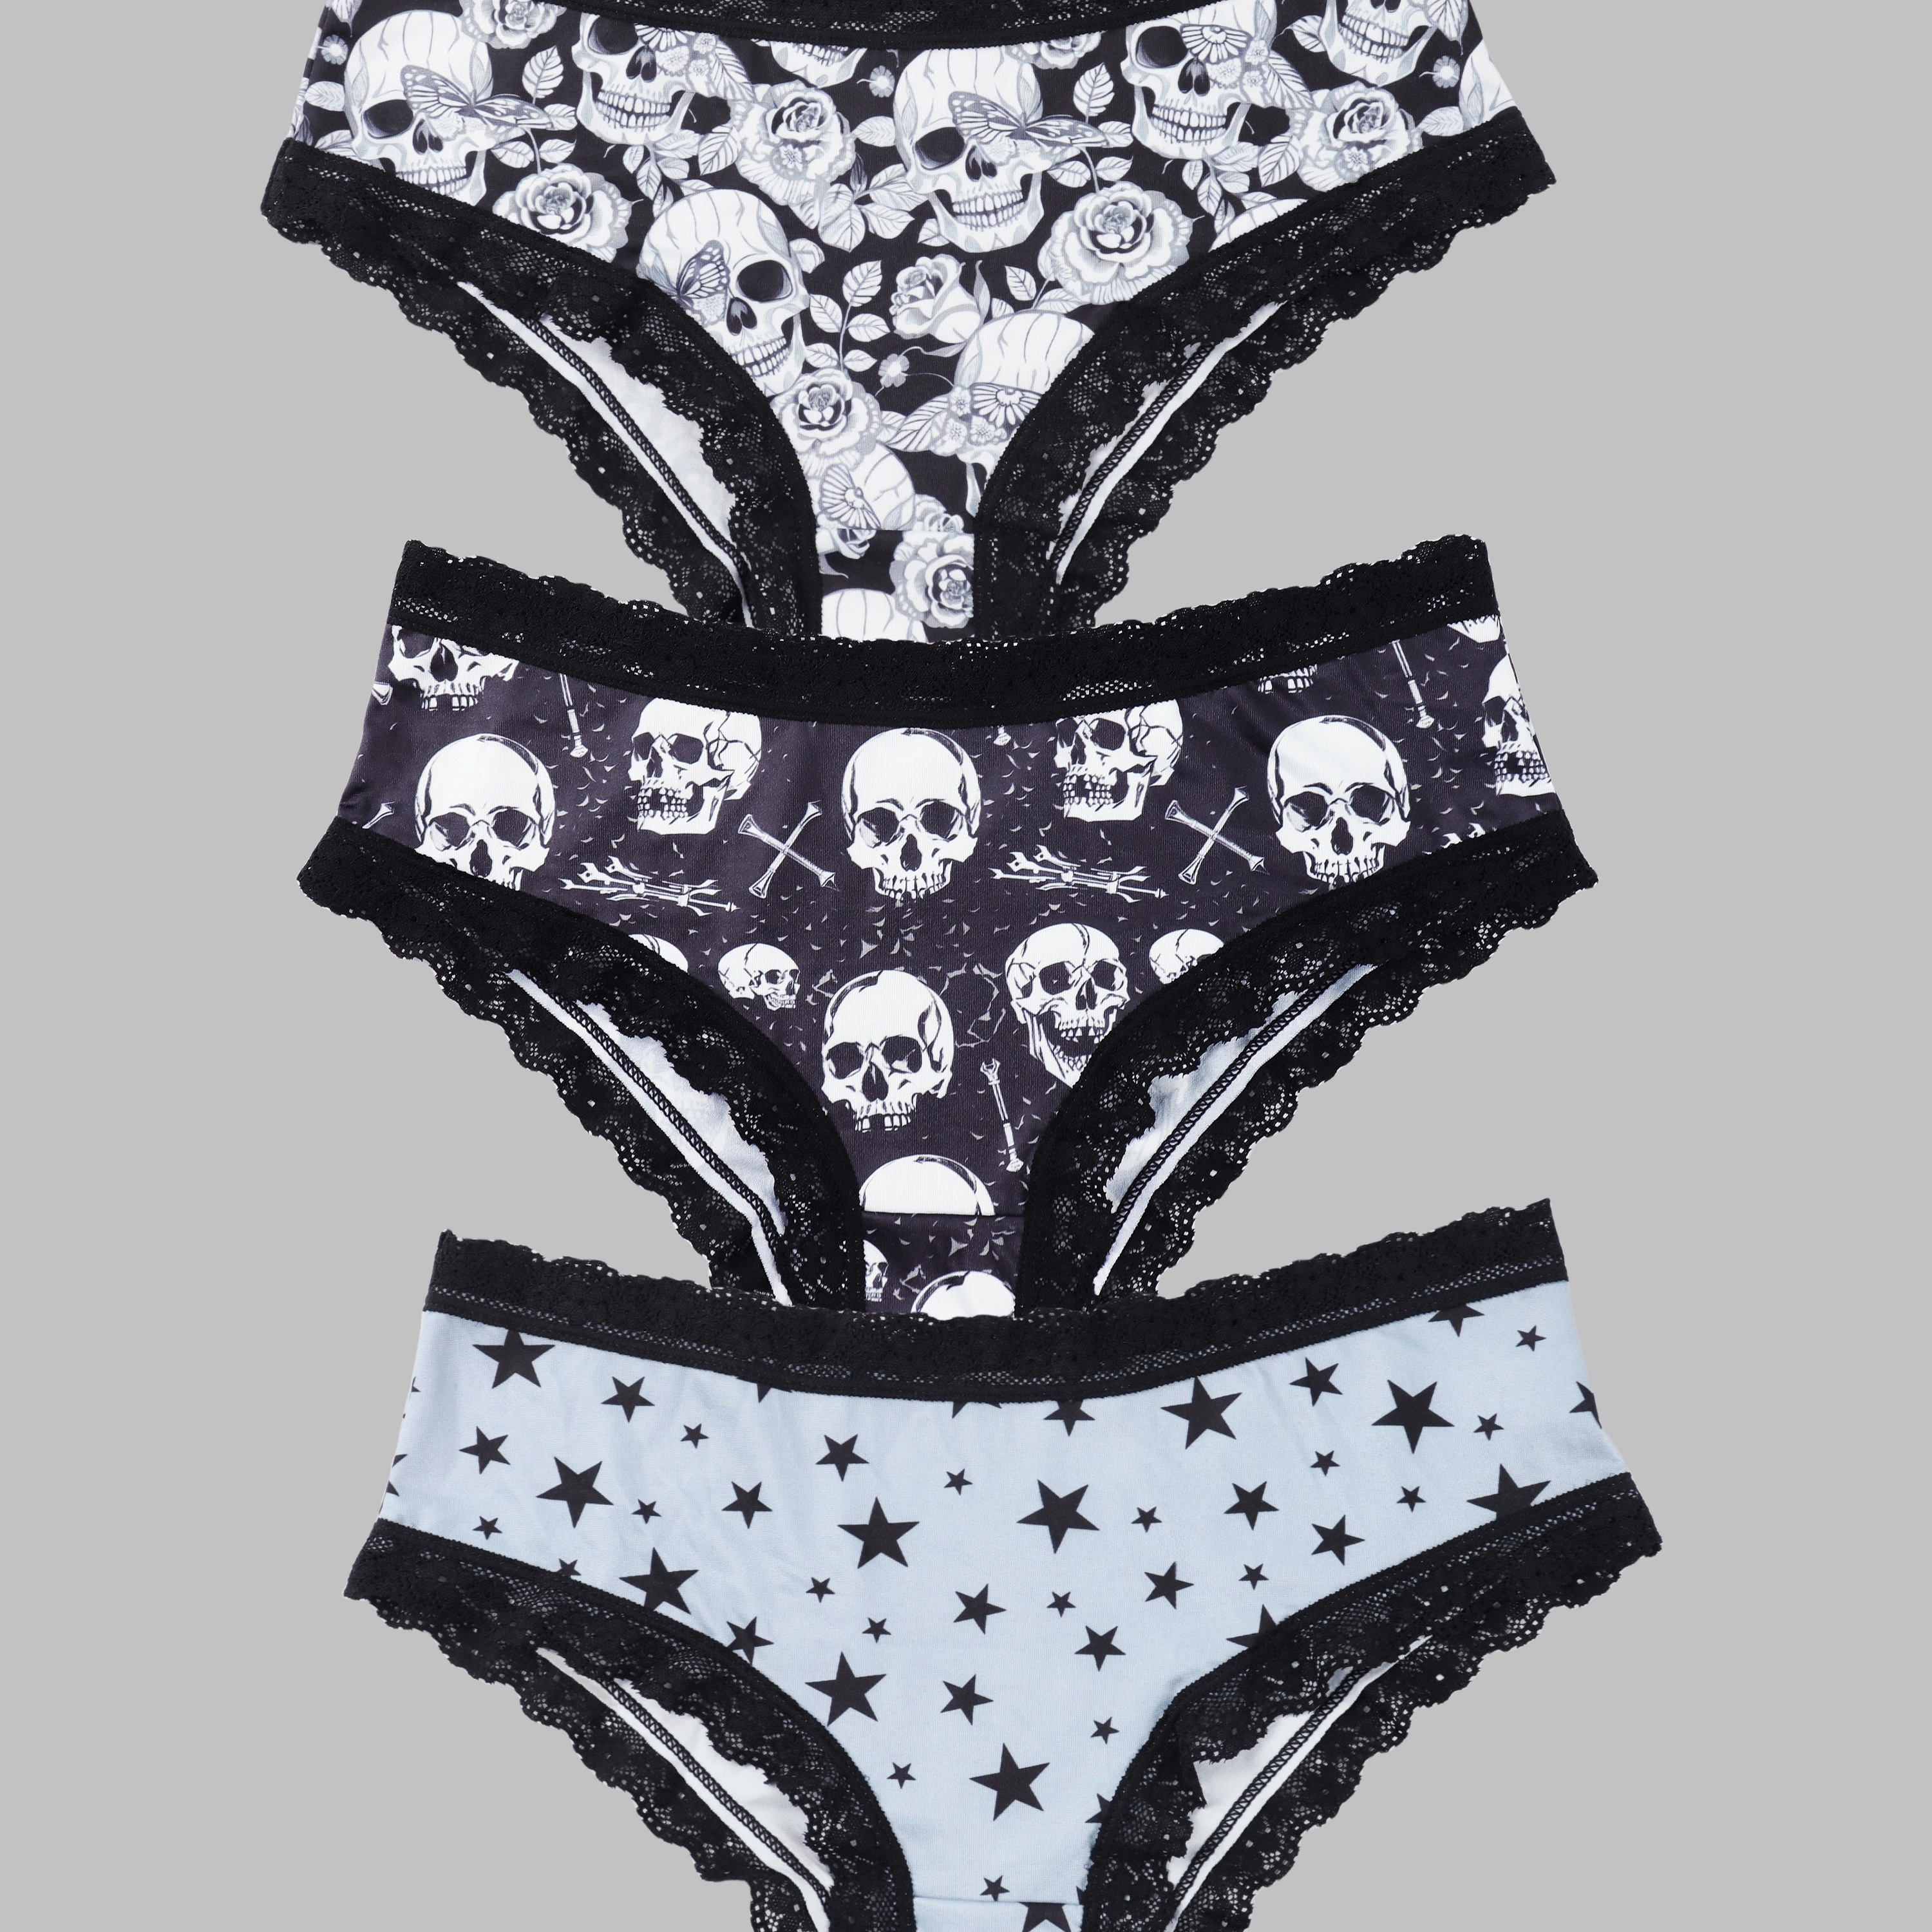 

3pcs Sexy Gothic Contrast Lace Hipster Panties Low Waisted Bikinis, Halloween Rose Skull & Stars Allover Print Intimates Panties, Women's Underwear & Lingerie